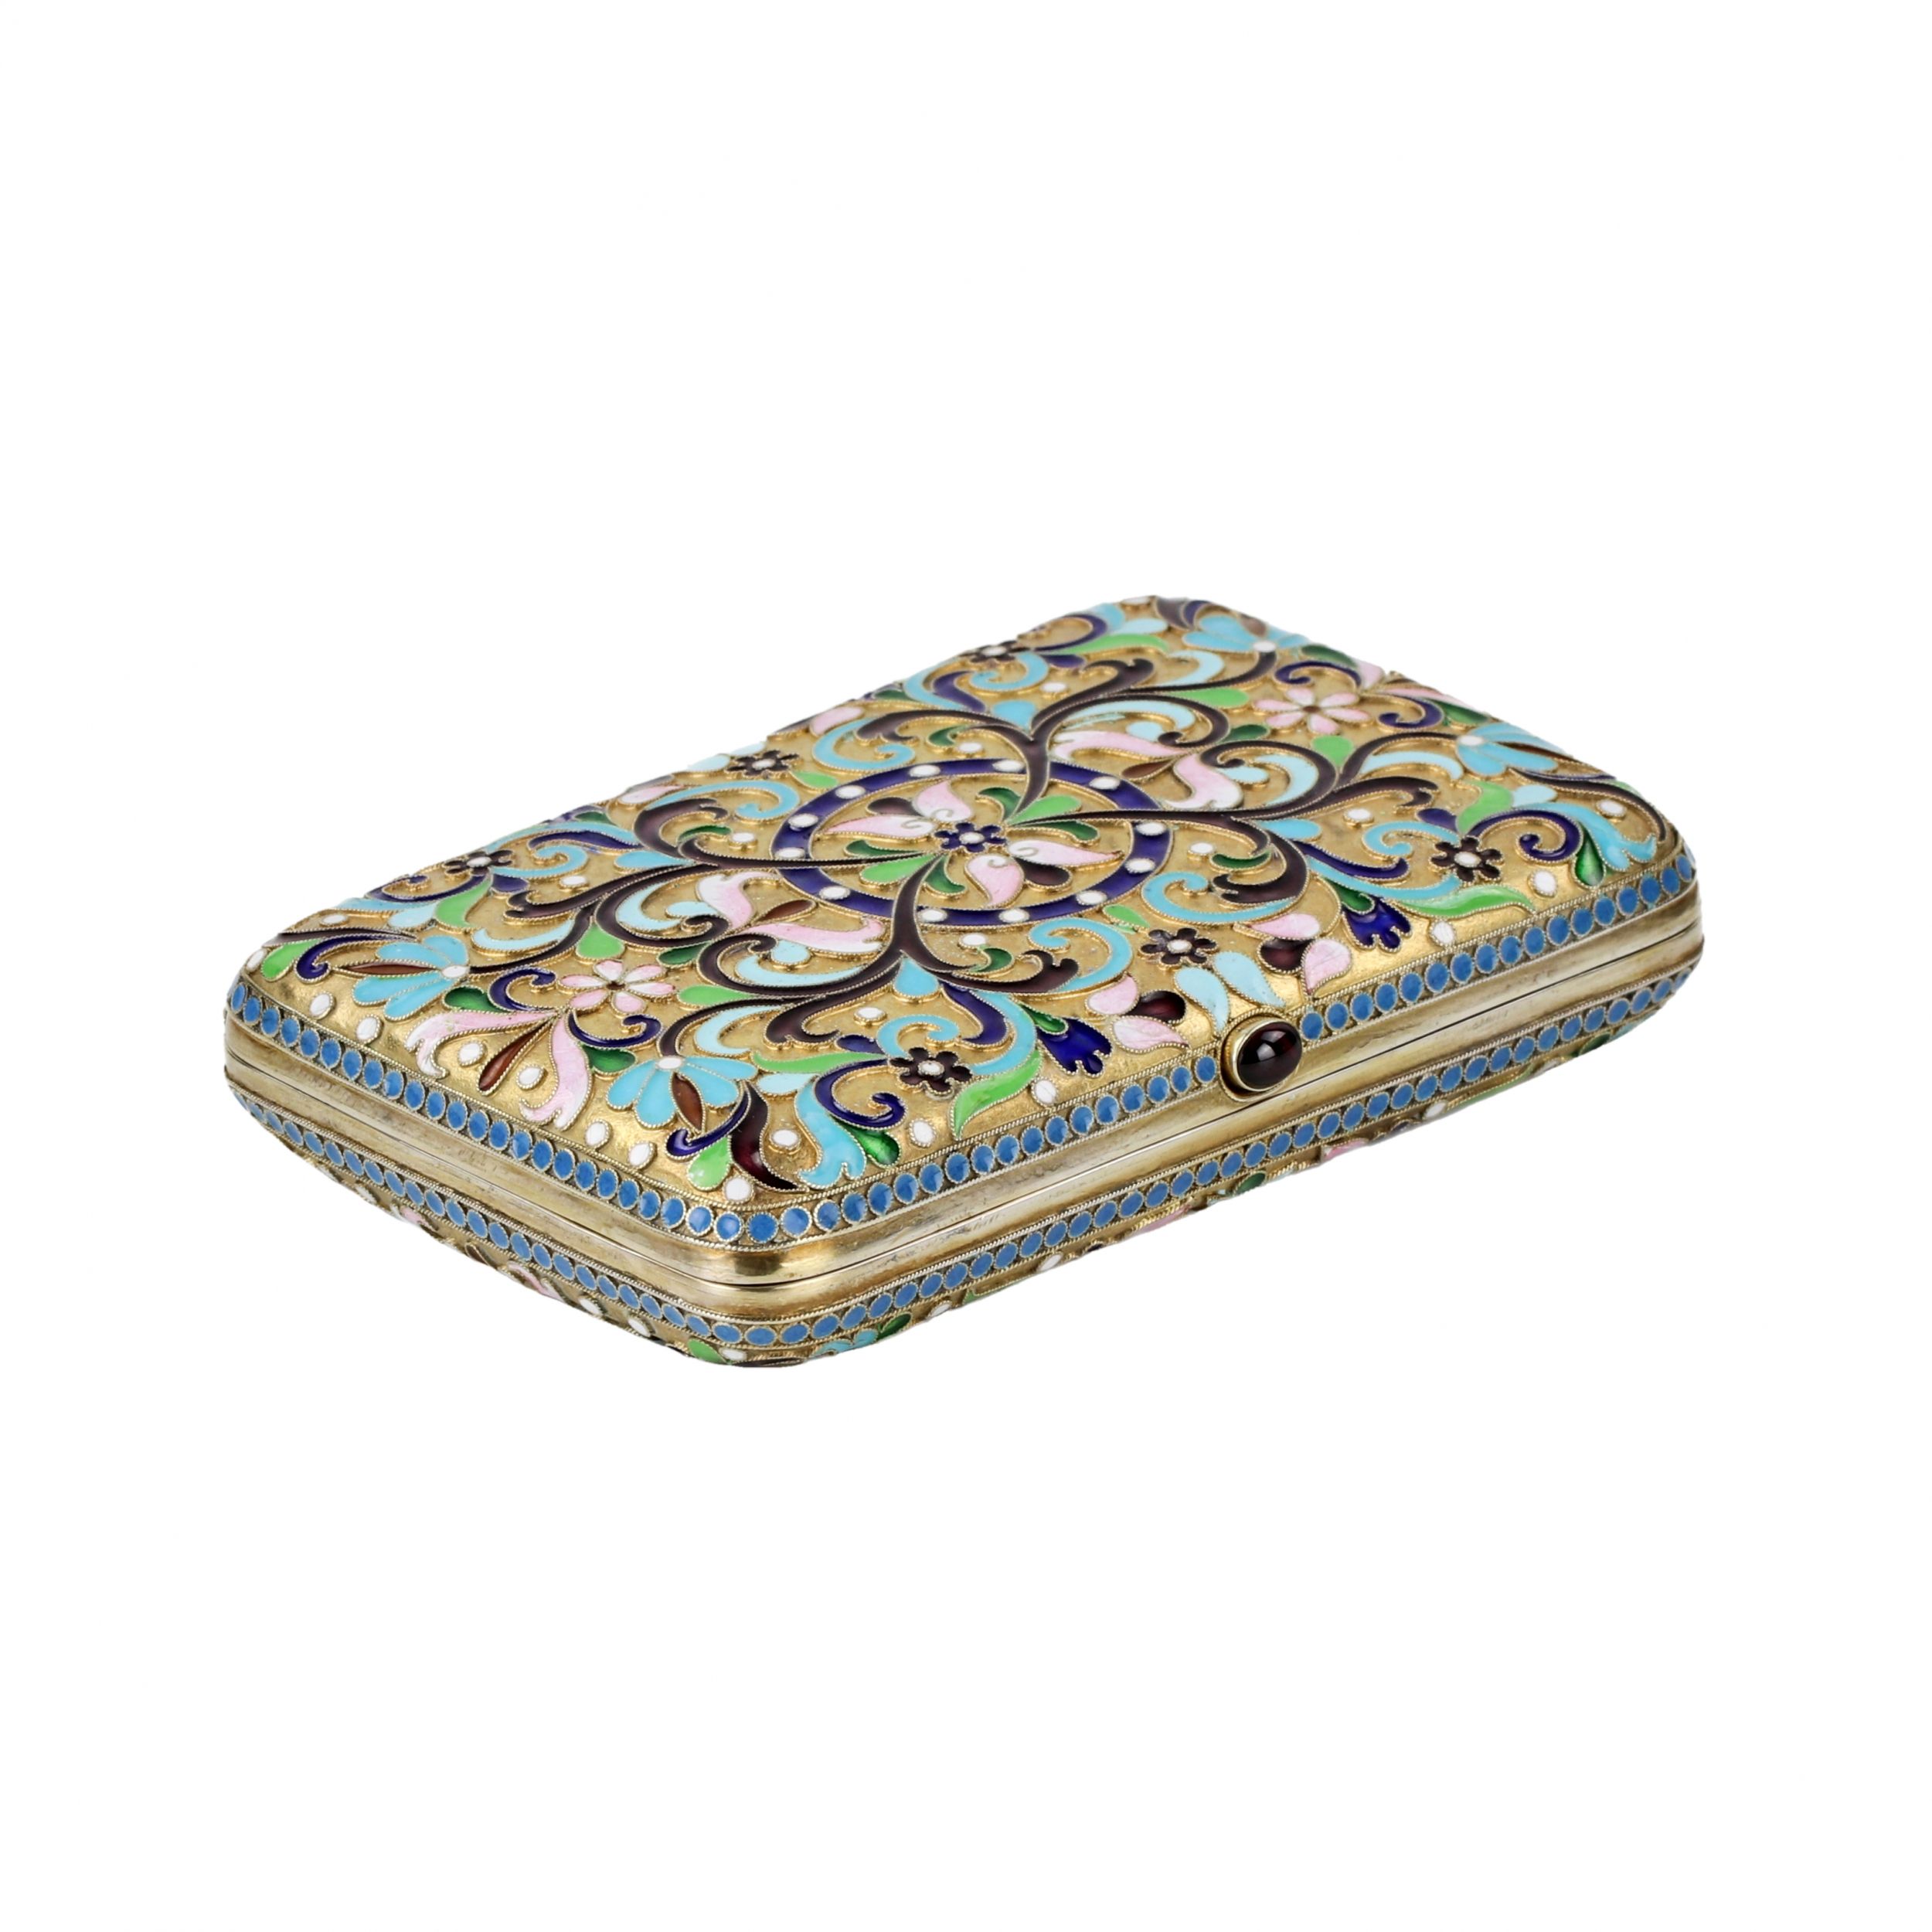 Russian-silver-cigarette-case-with-gilding-and-cloisonne-enamel-